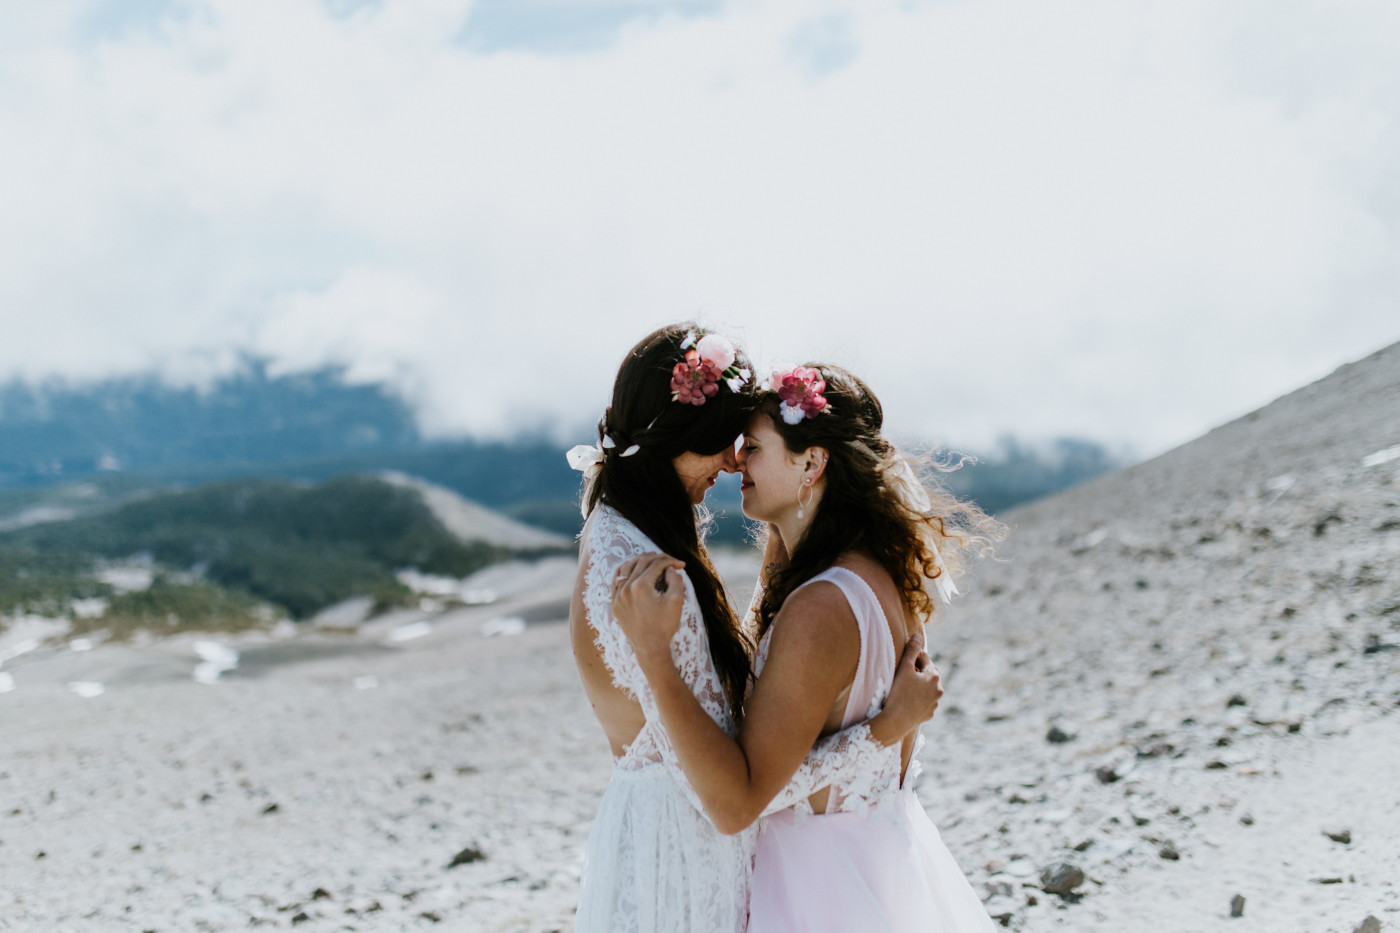 Margaux and Heather smile as they dance. Elopement photography at Mount Hood by Sienna Plus Josh.